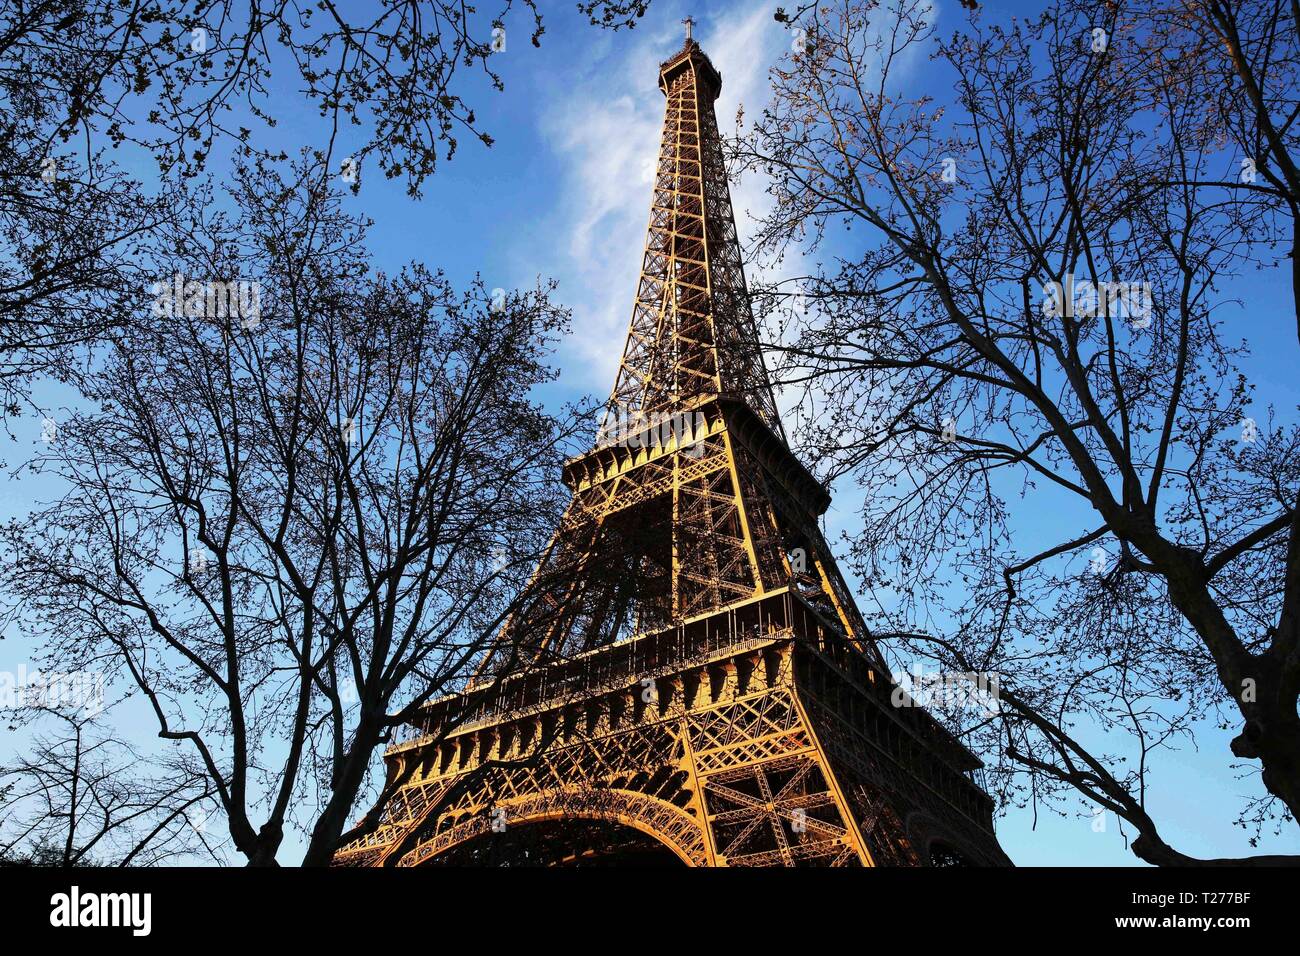 (190331) -- BEIJING, March 31, 2019 (Xinhua) -- Photo taken on March 30, 2019 shows the Eiffel Tower in Paris, capital of France. The landmark of Paris will celebrate its 130th birthday on March 31. Stock Photo